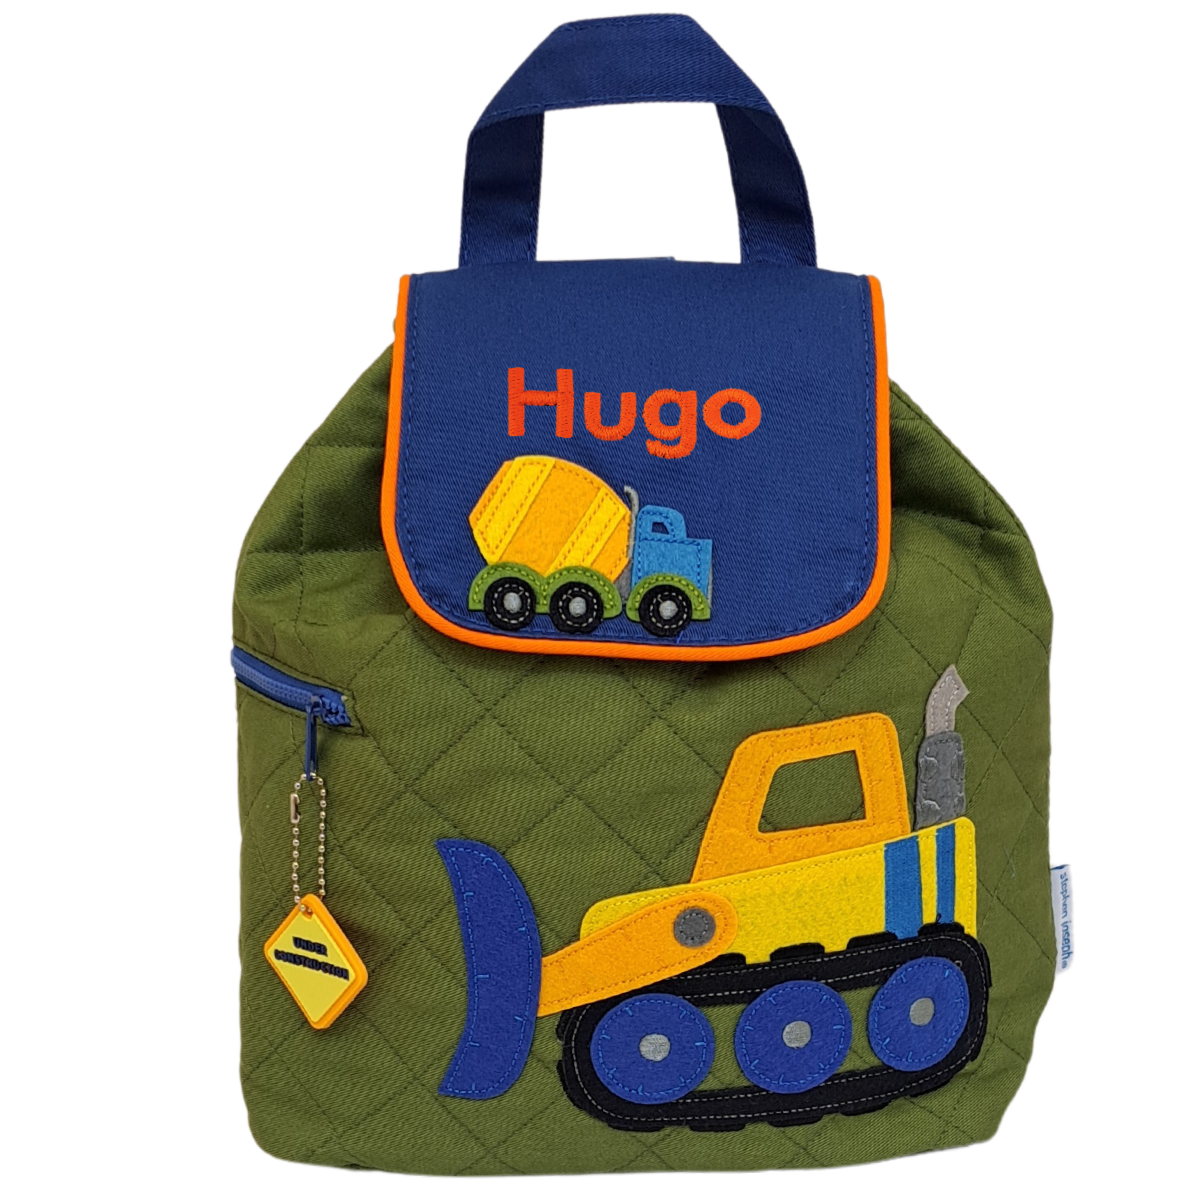 Image of a personalised Stephen Joseph back pack. The back pack has a khaki green main body with a blue closing flap. The bag has an appliqued digger and dumper truck on it in bright colours, and the bag can be personalised with a name of up to 10 characters which will be embroidered on the flap.